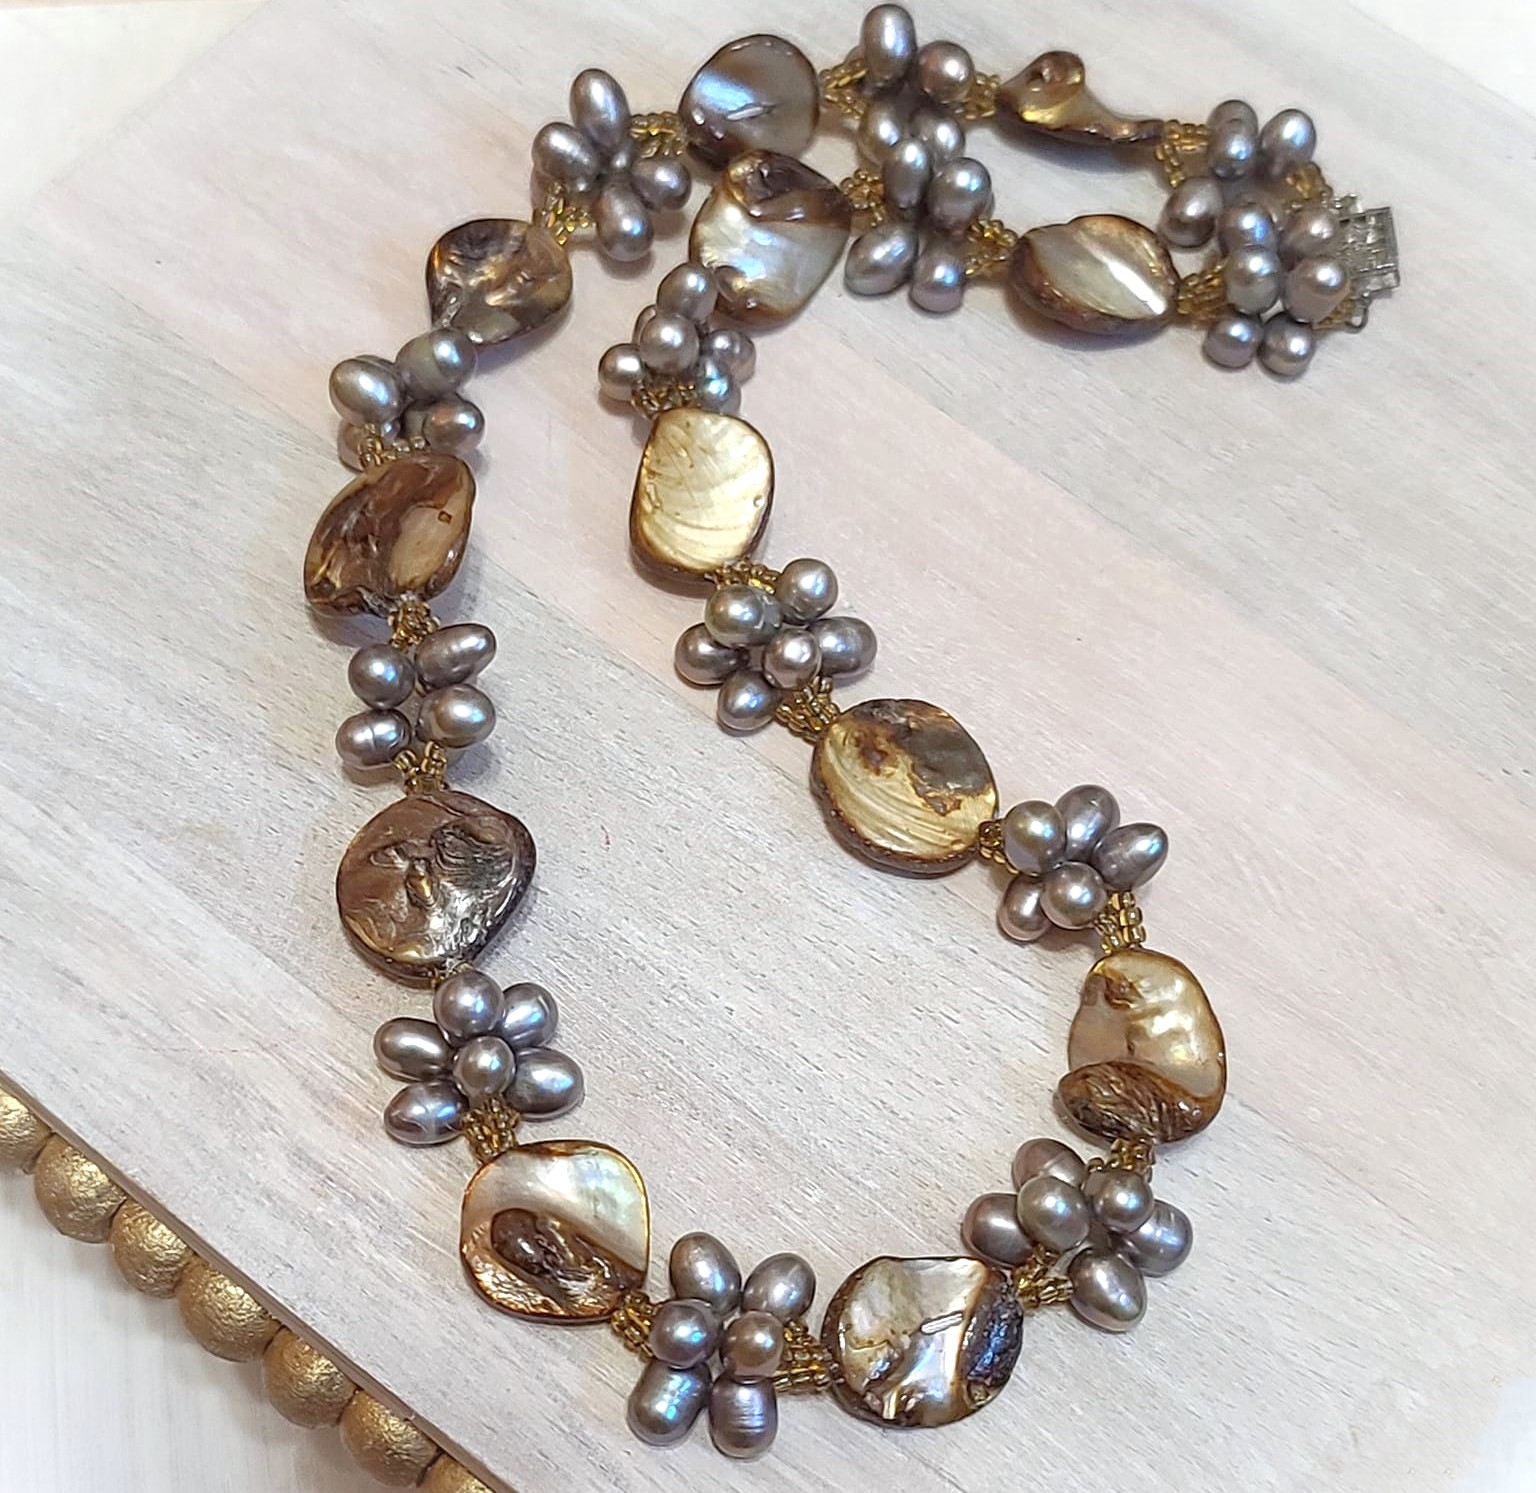 Freshwater & Blister Pearls with Shell Necklace